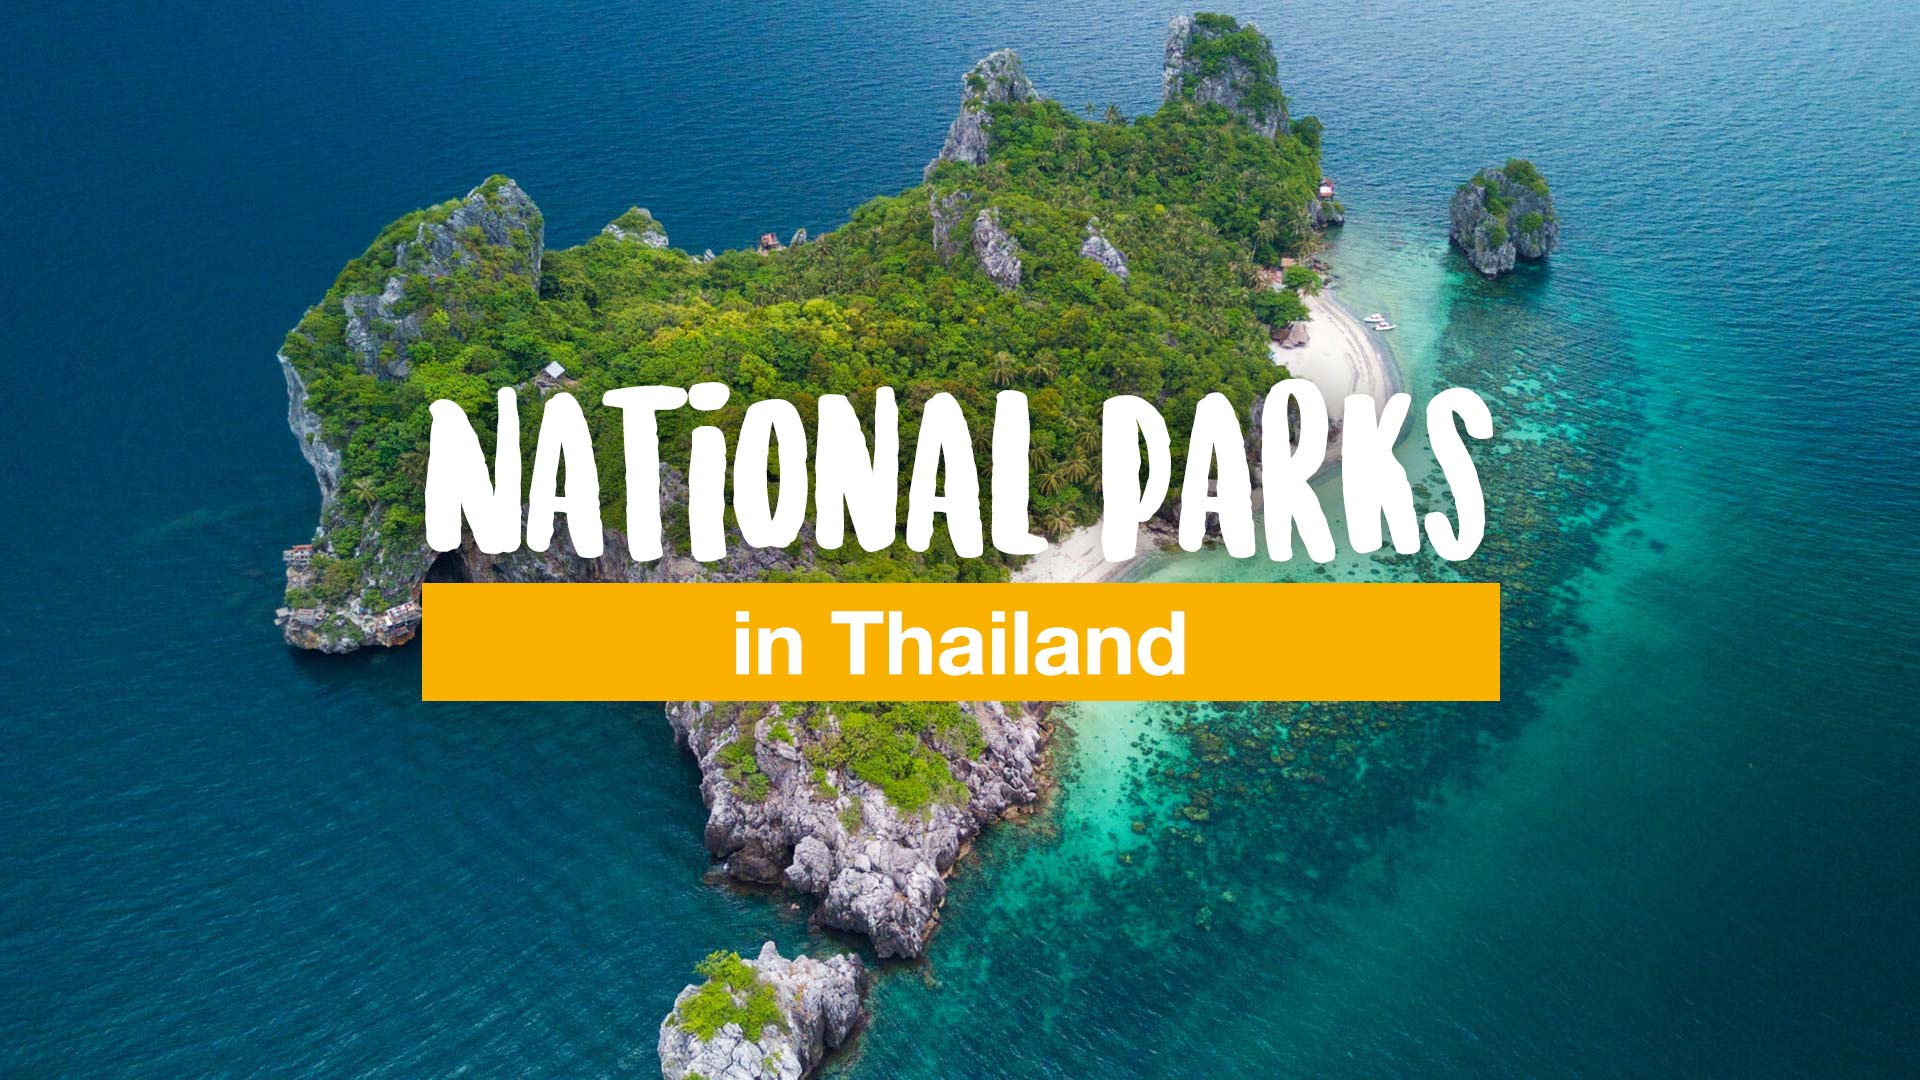 Thailand’s national parks returning to usual open/closed schedules